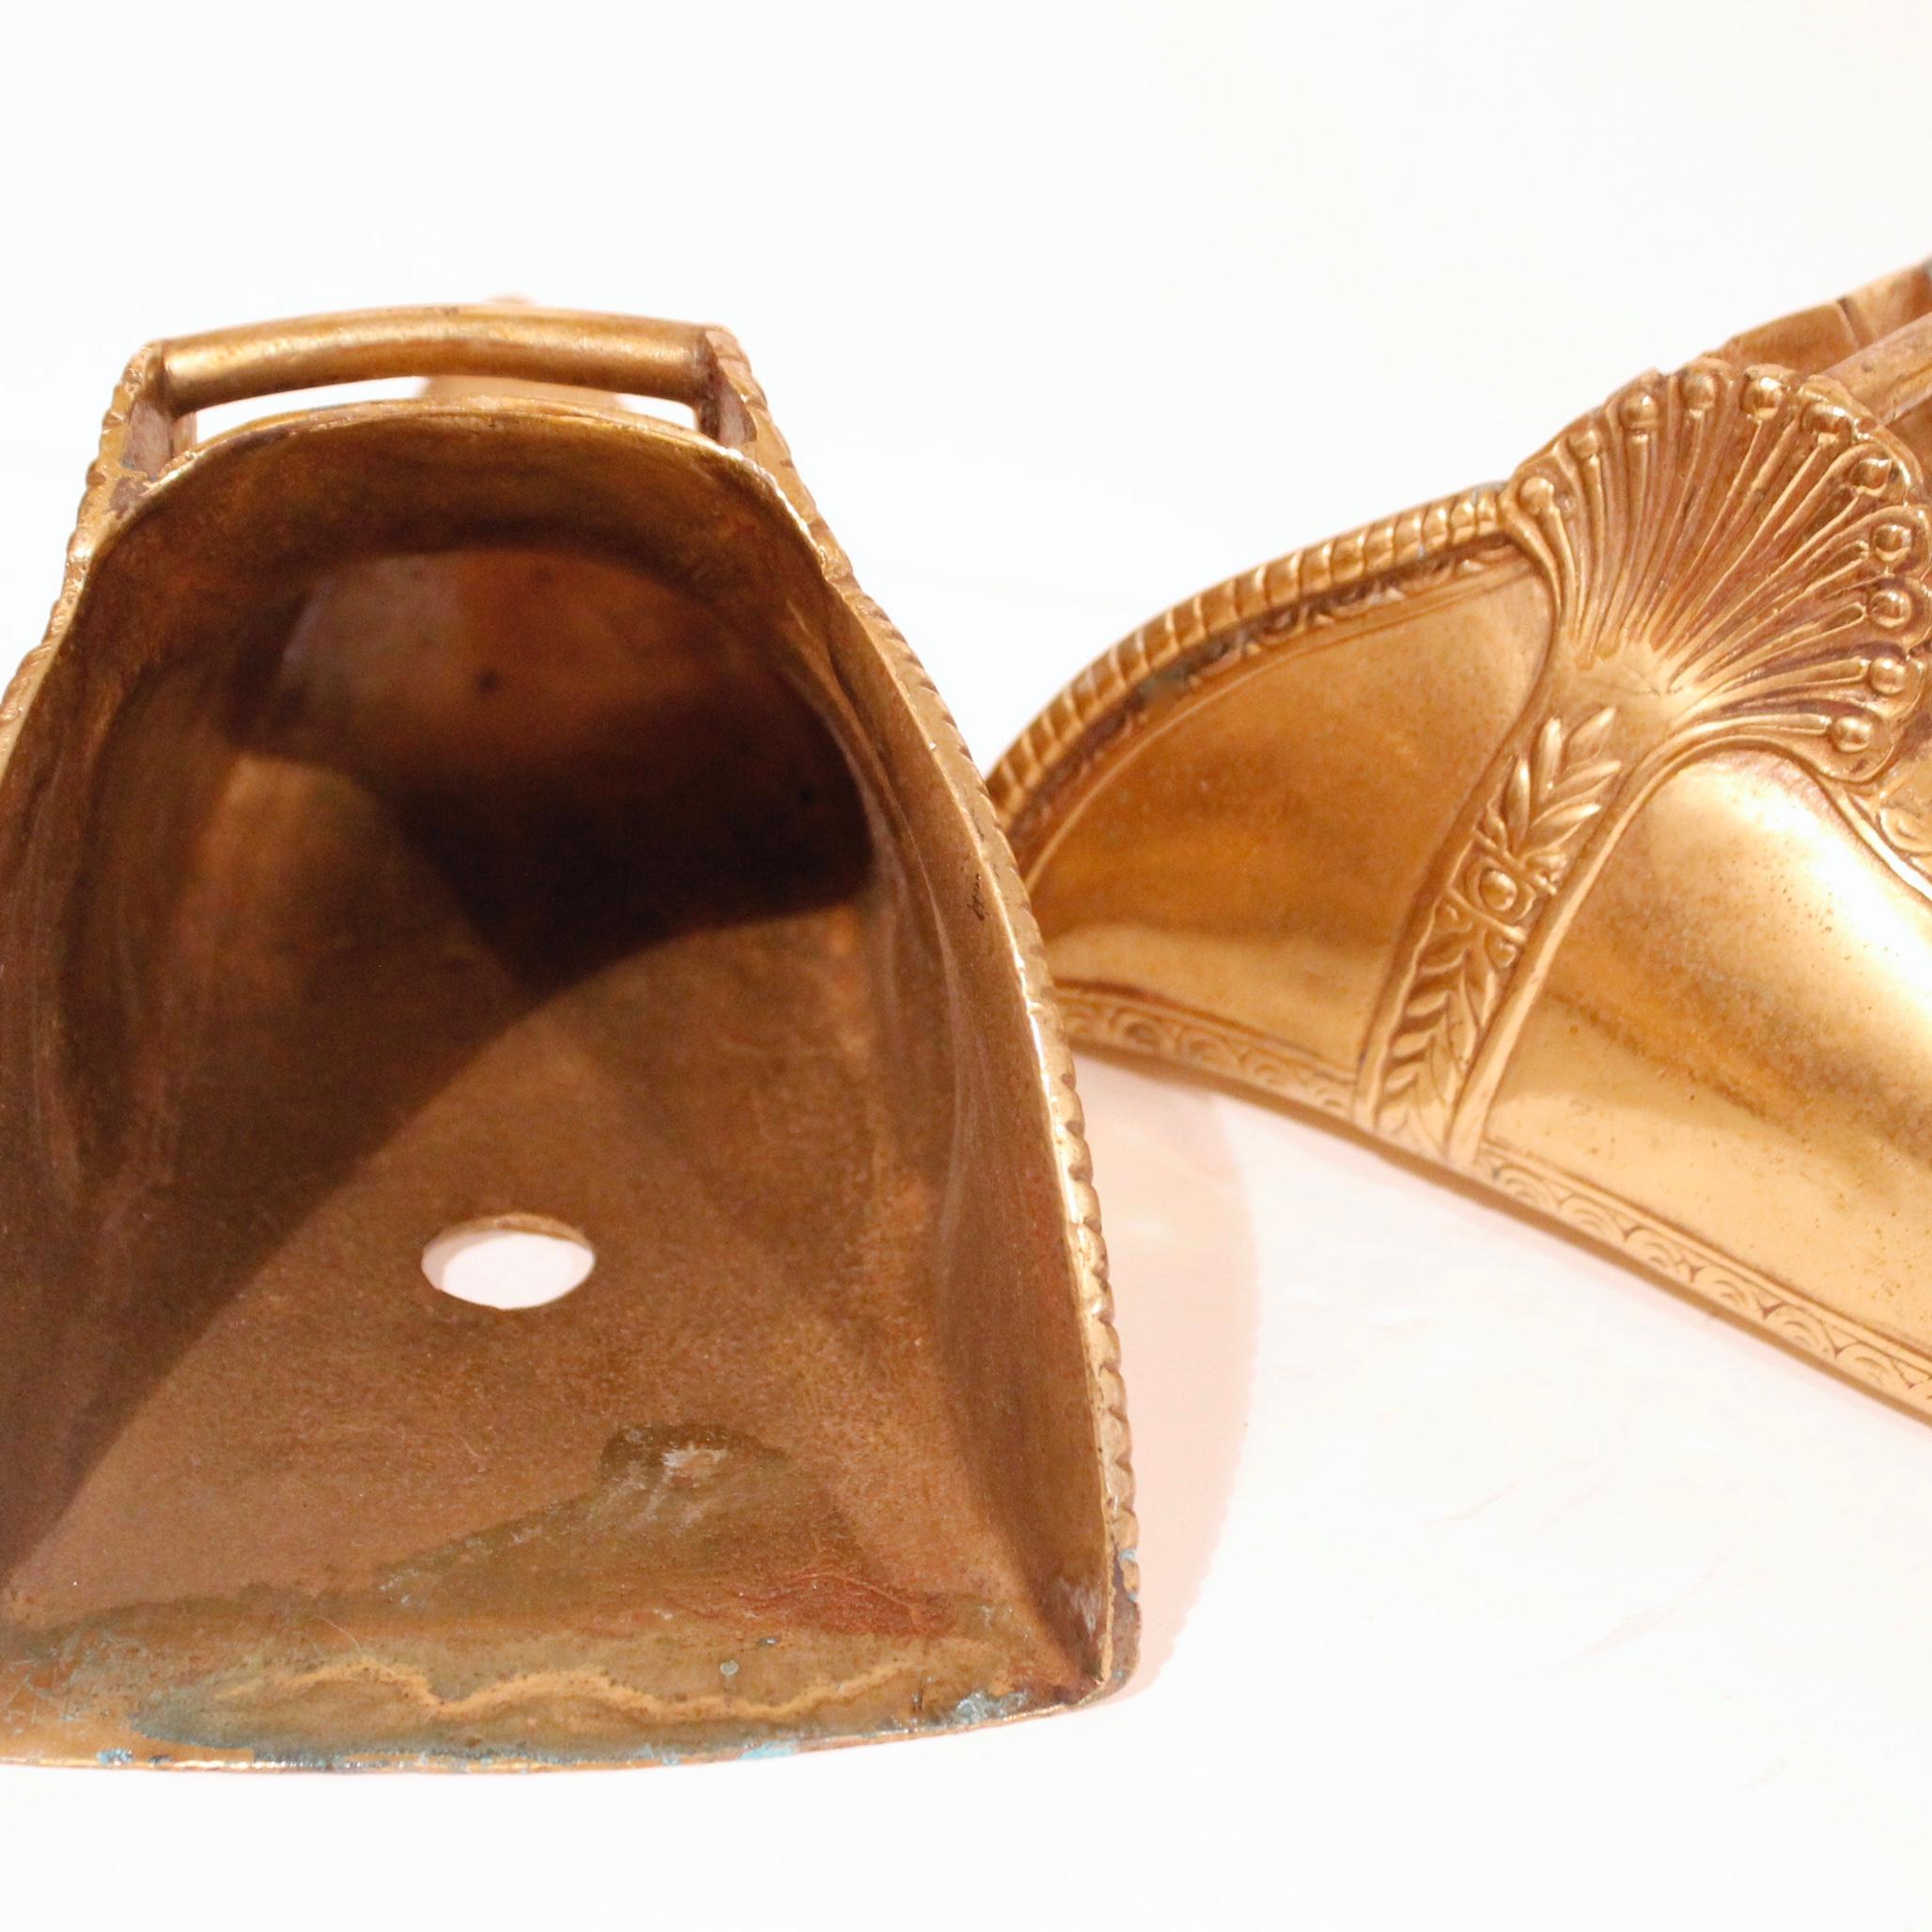 Pair Of Brass Stirrups, 19th Century, Spanish Colonial For Sale 6